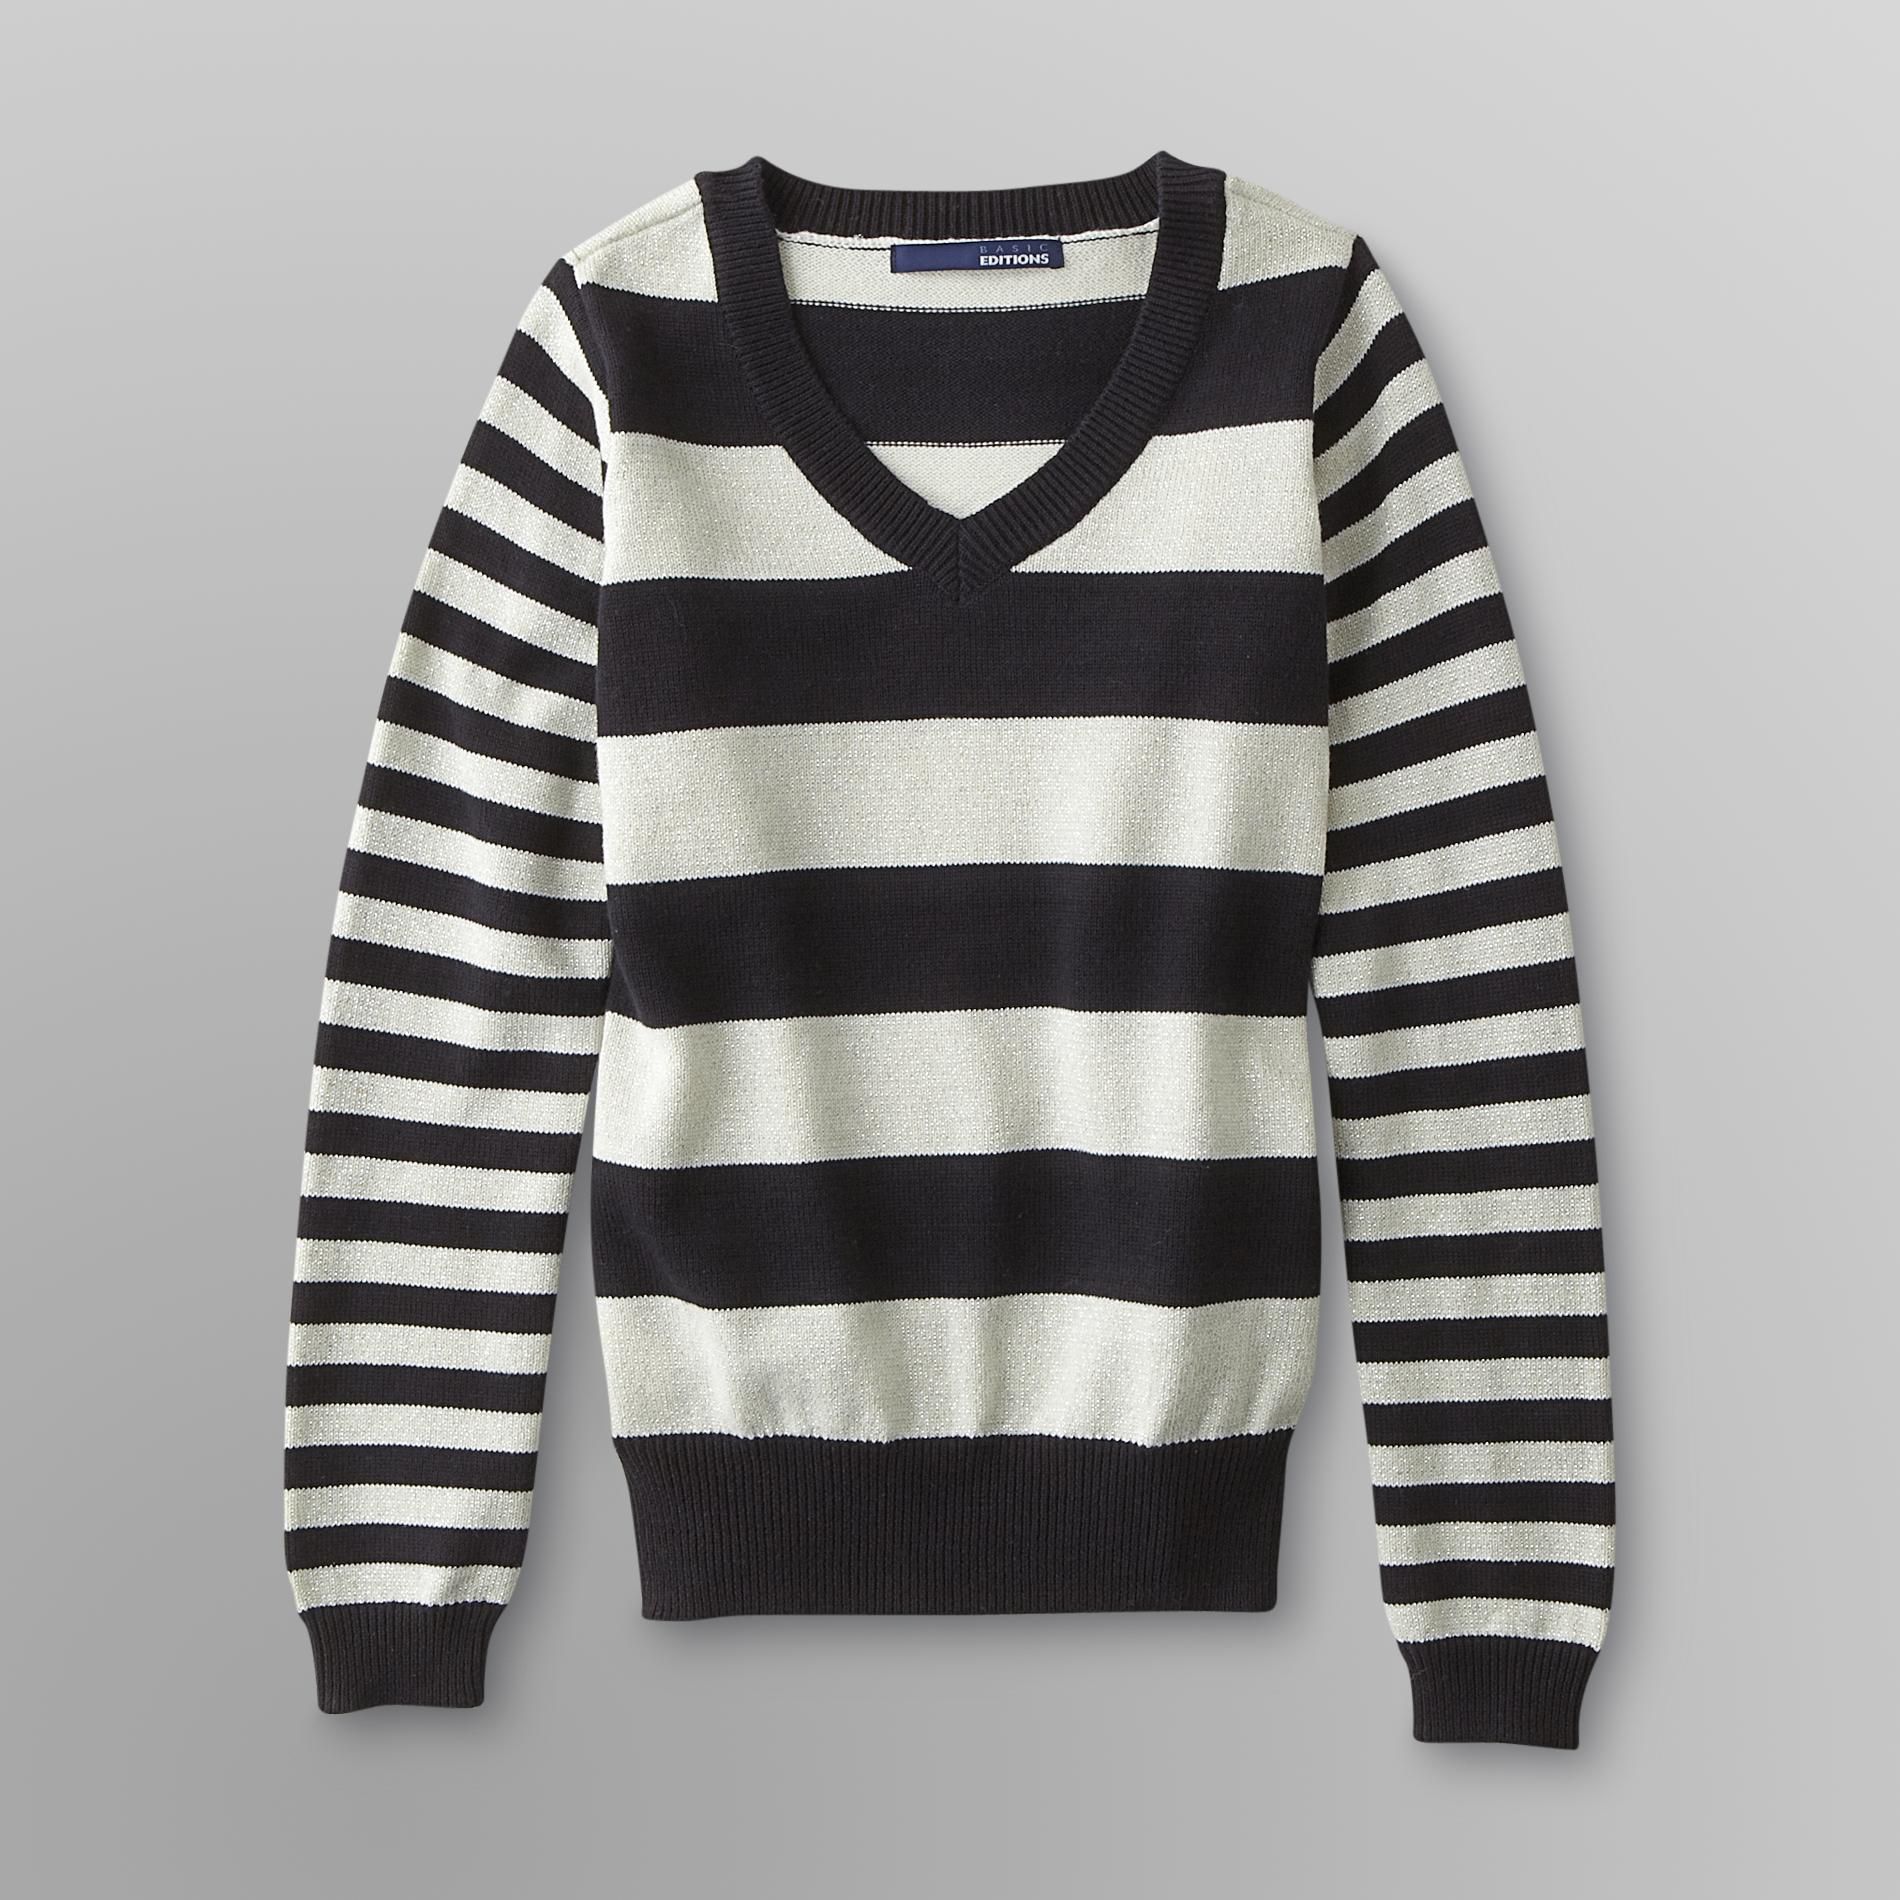 Basic Editions Girl's Shimmer Sweater - Striped